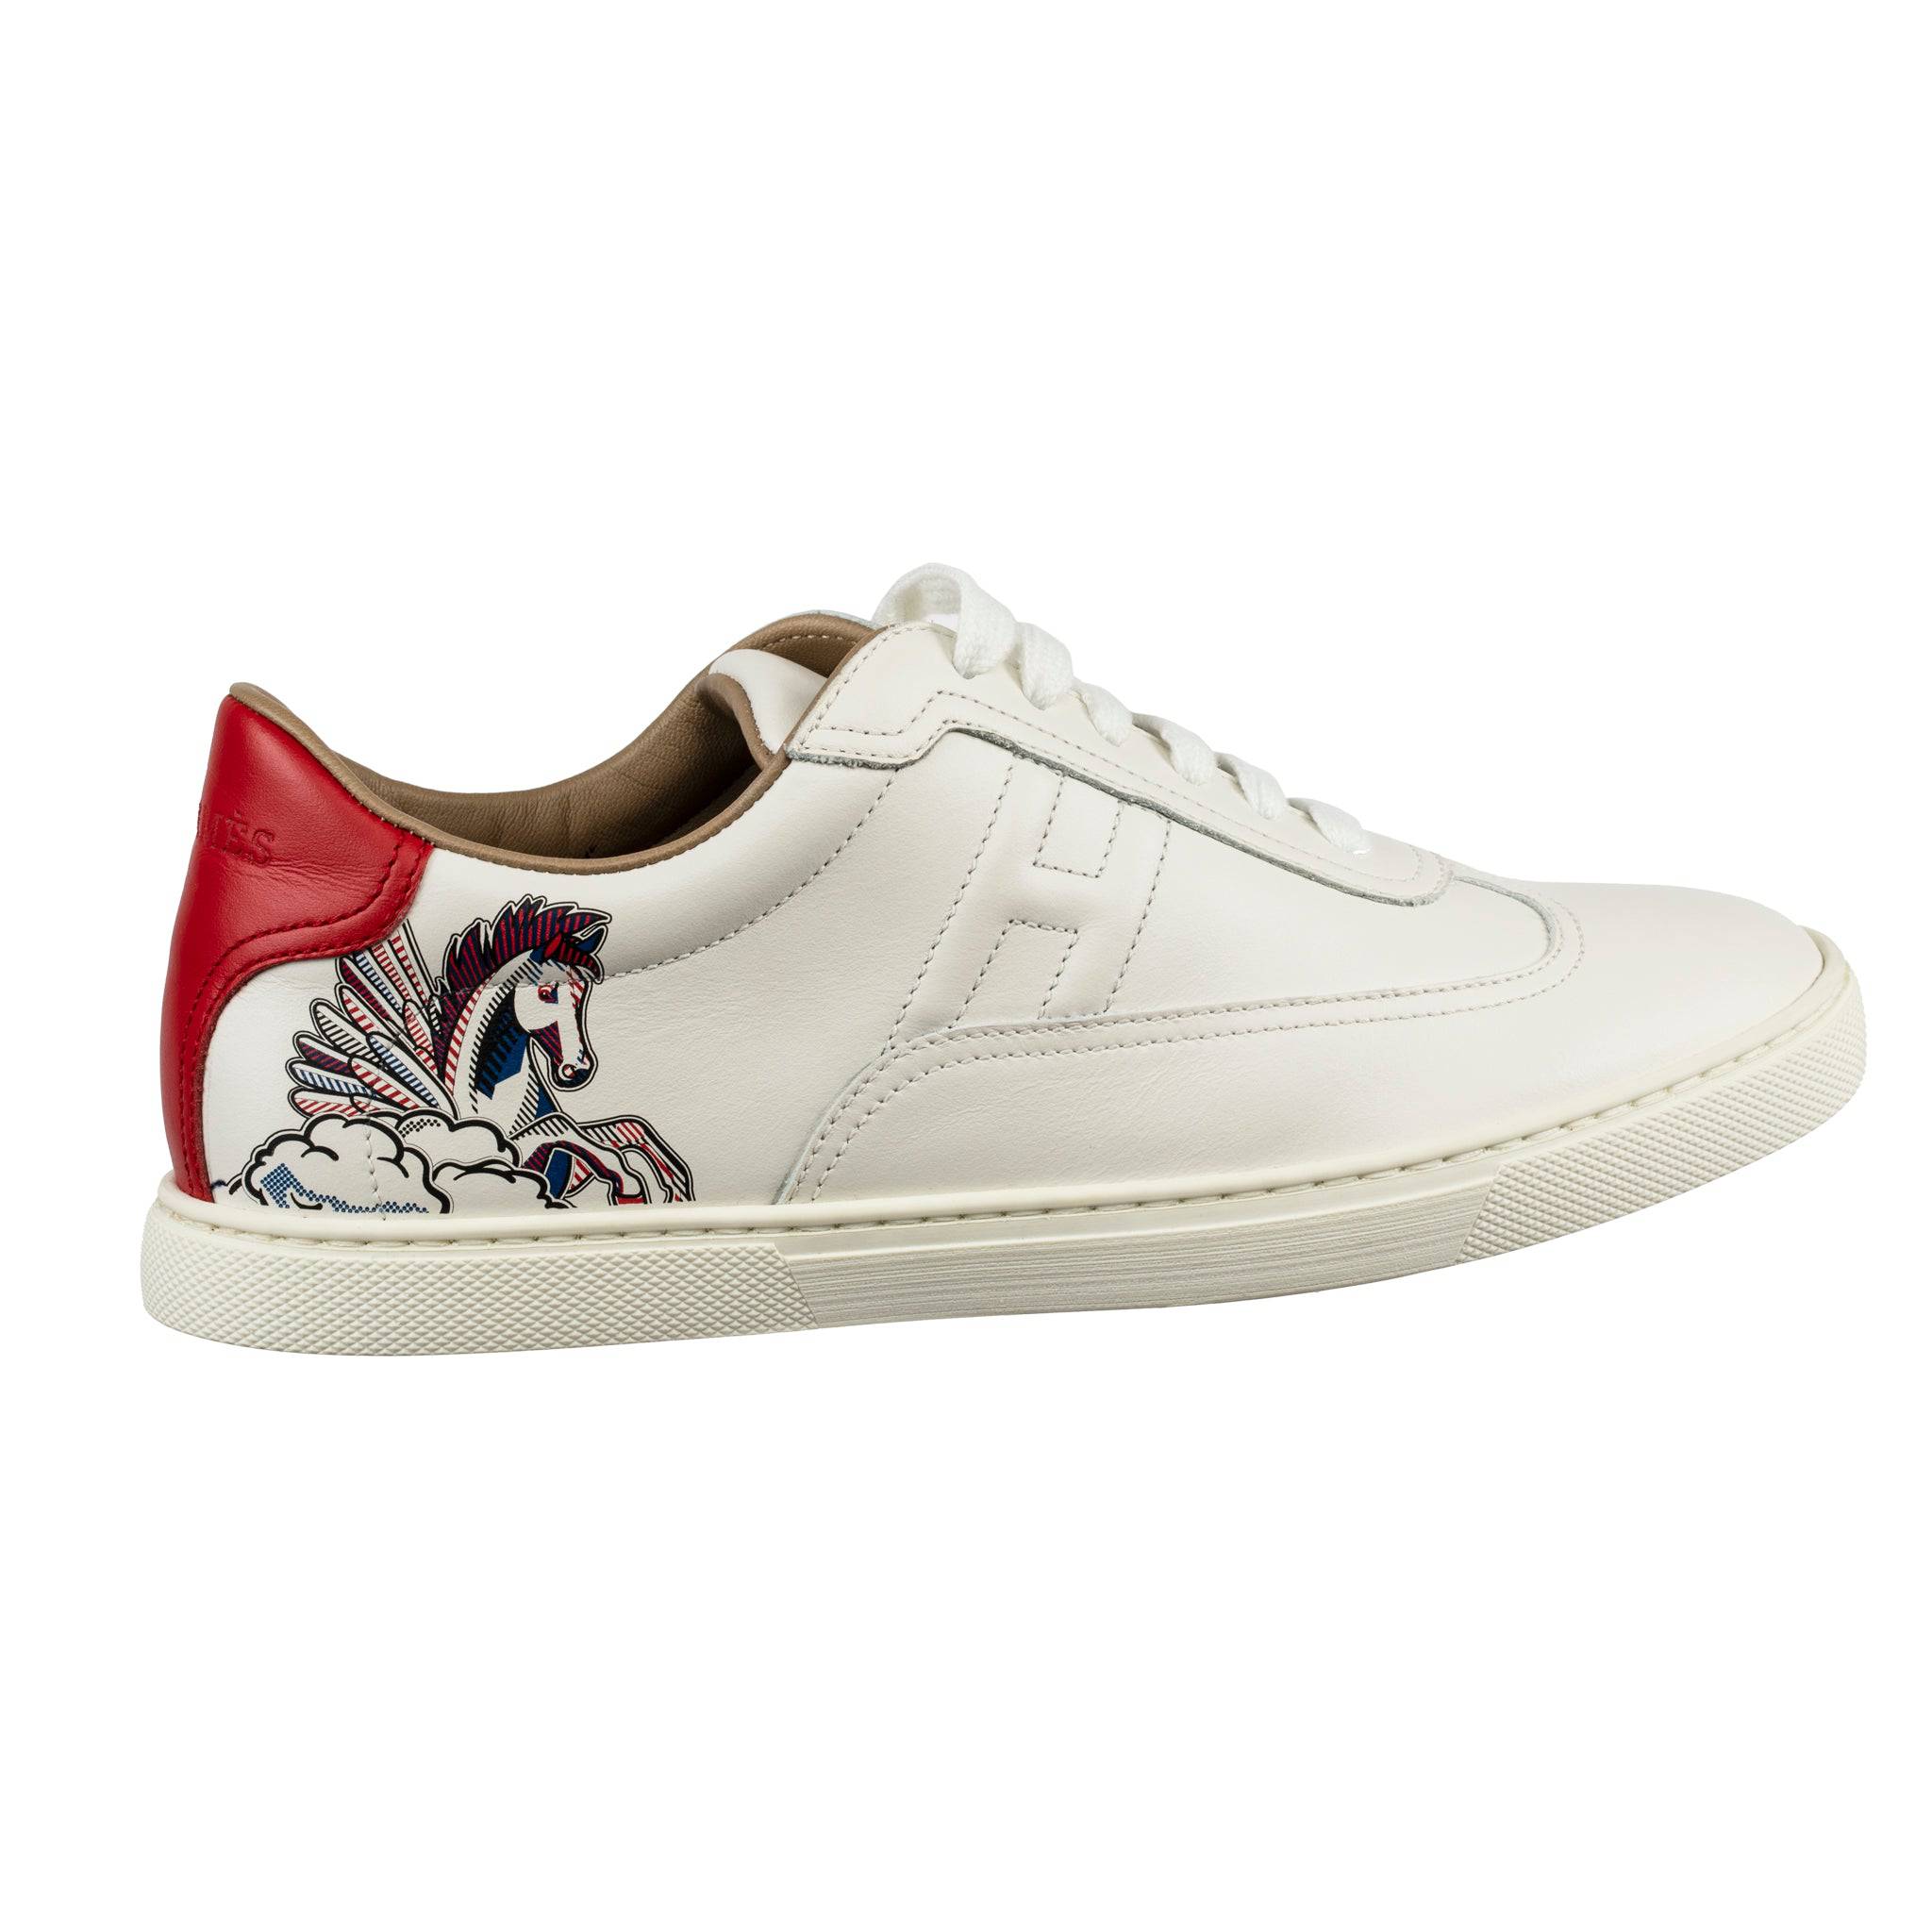 HERMES QUICKER SNEAKER WITH PEGASUS DESIGN 37.5 FR - On Repeat